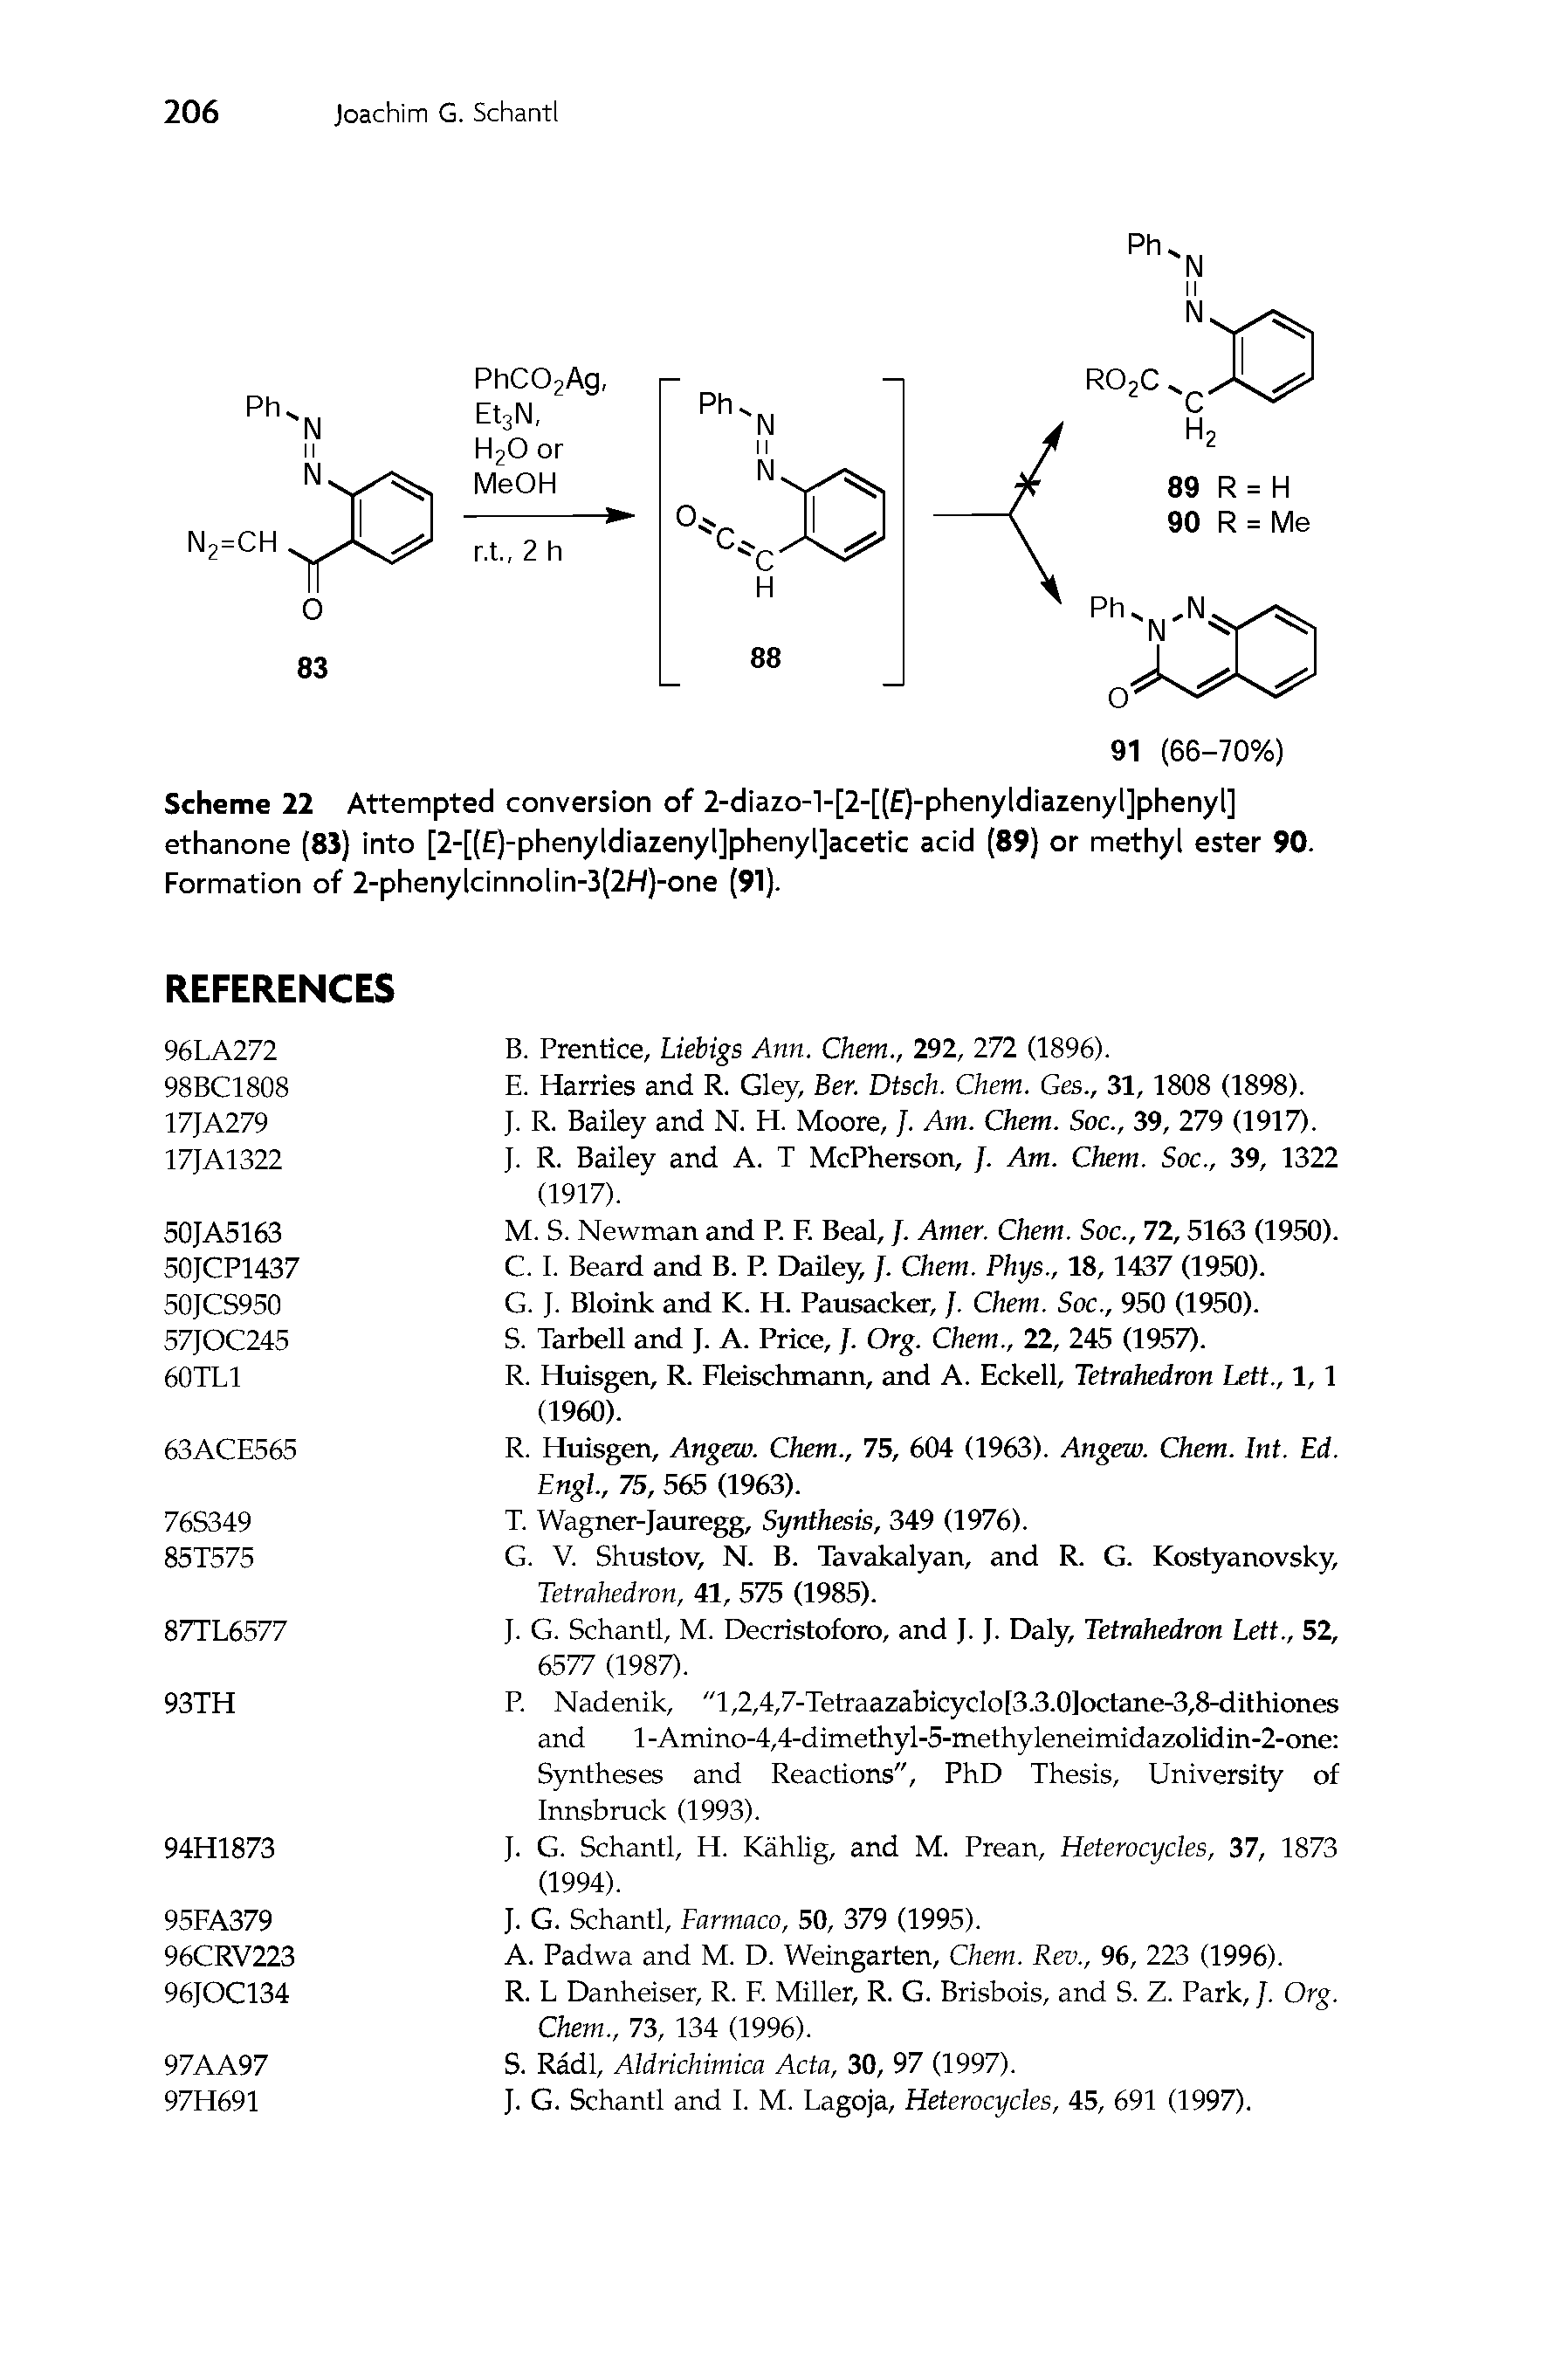 Scheme 22 Attempted conversion of 2-diazo-l-[2-[( )-phenyldiazenyl]phenyl] ethanone (83) into [2-[(E)-phenyldiazenyl]phenyl]acetic acid (89) or methyl ester 90. Formation of 2-phenylcinnolin-3(2H)-one (91).